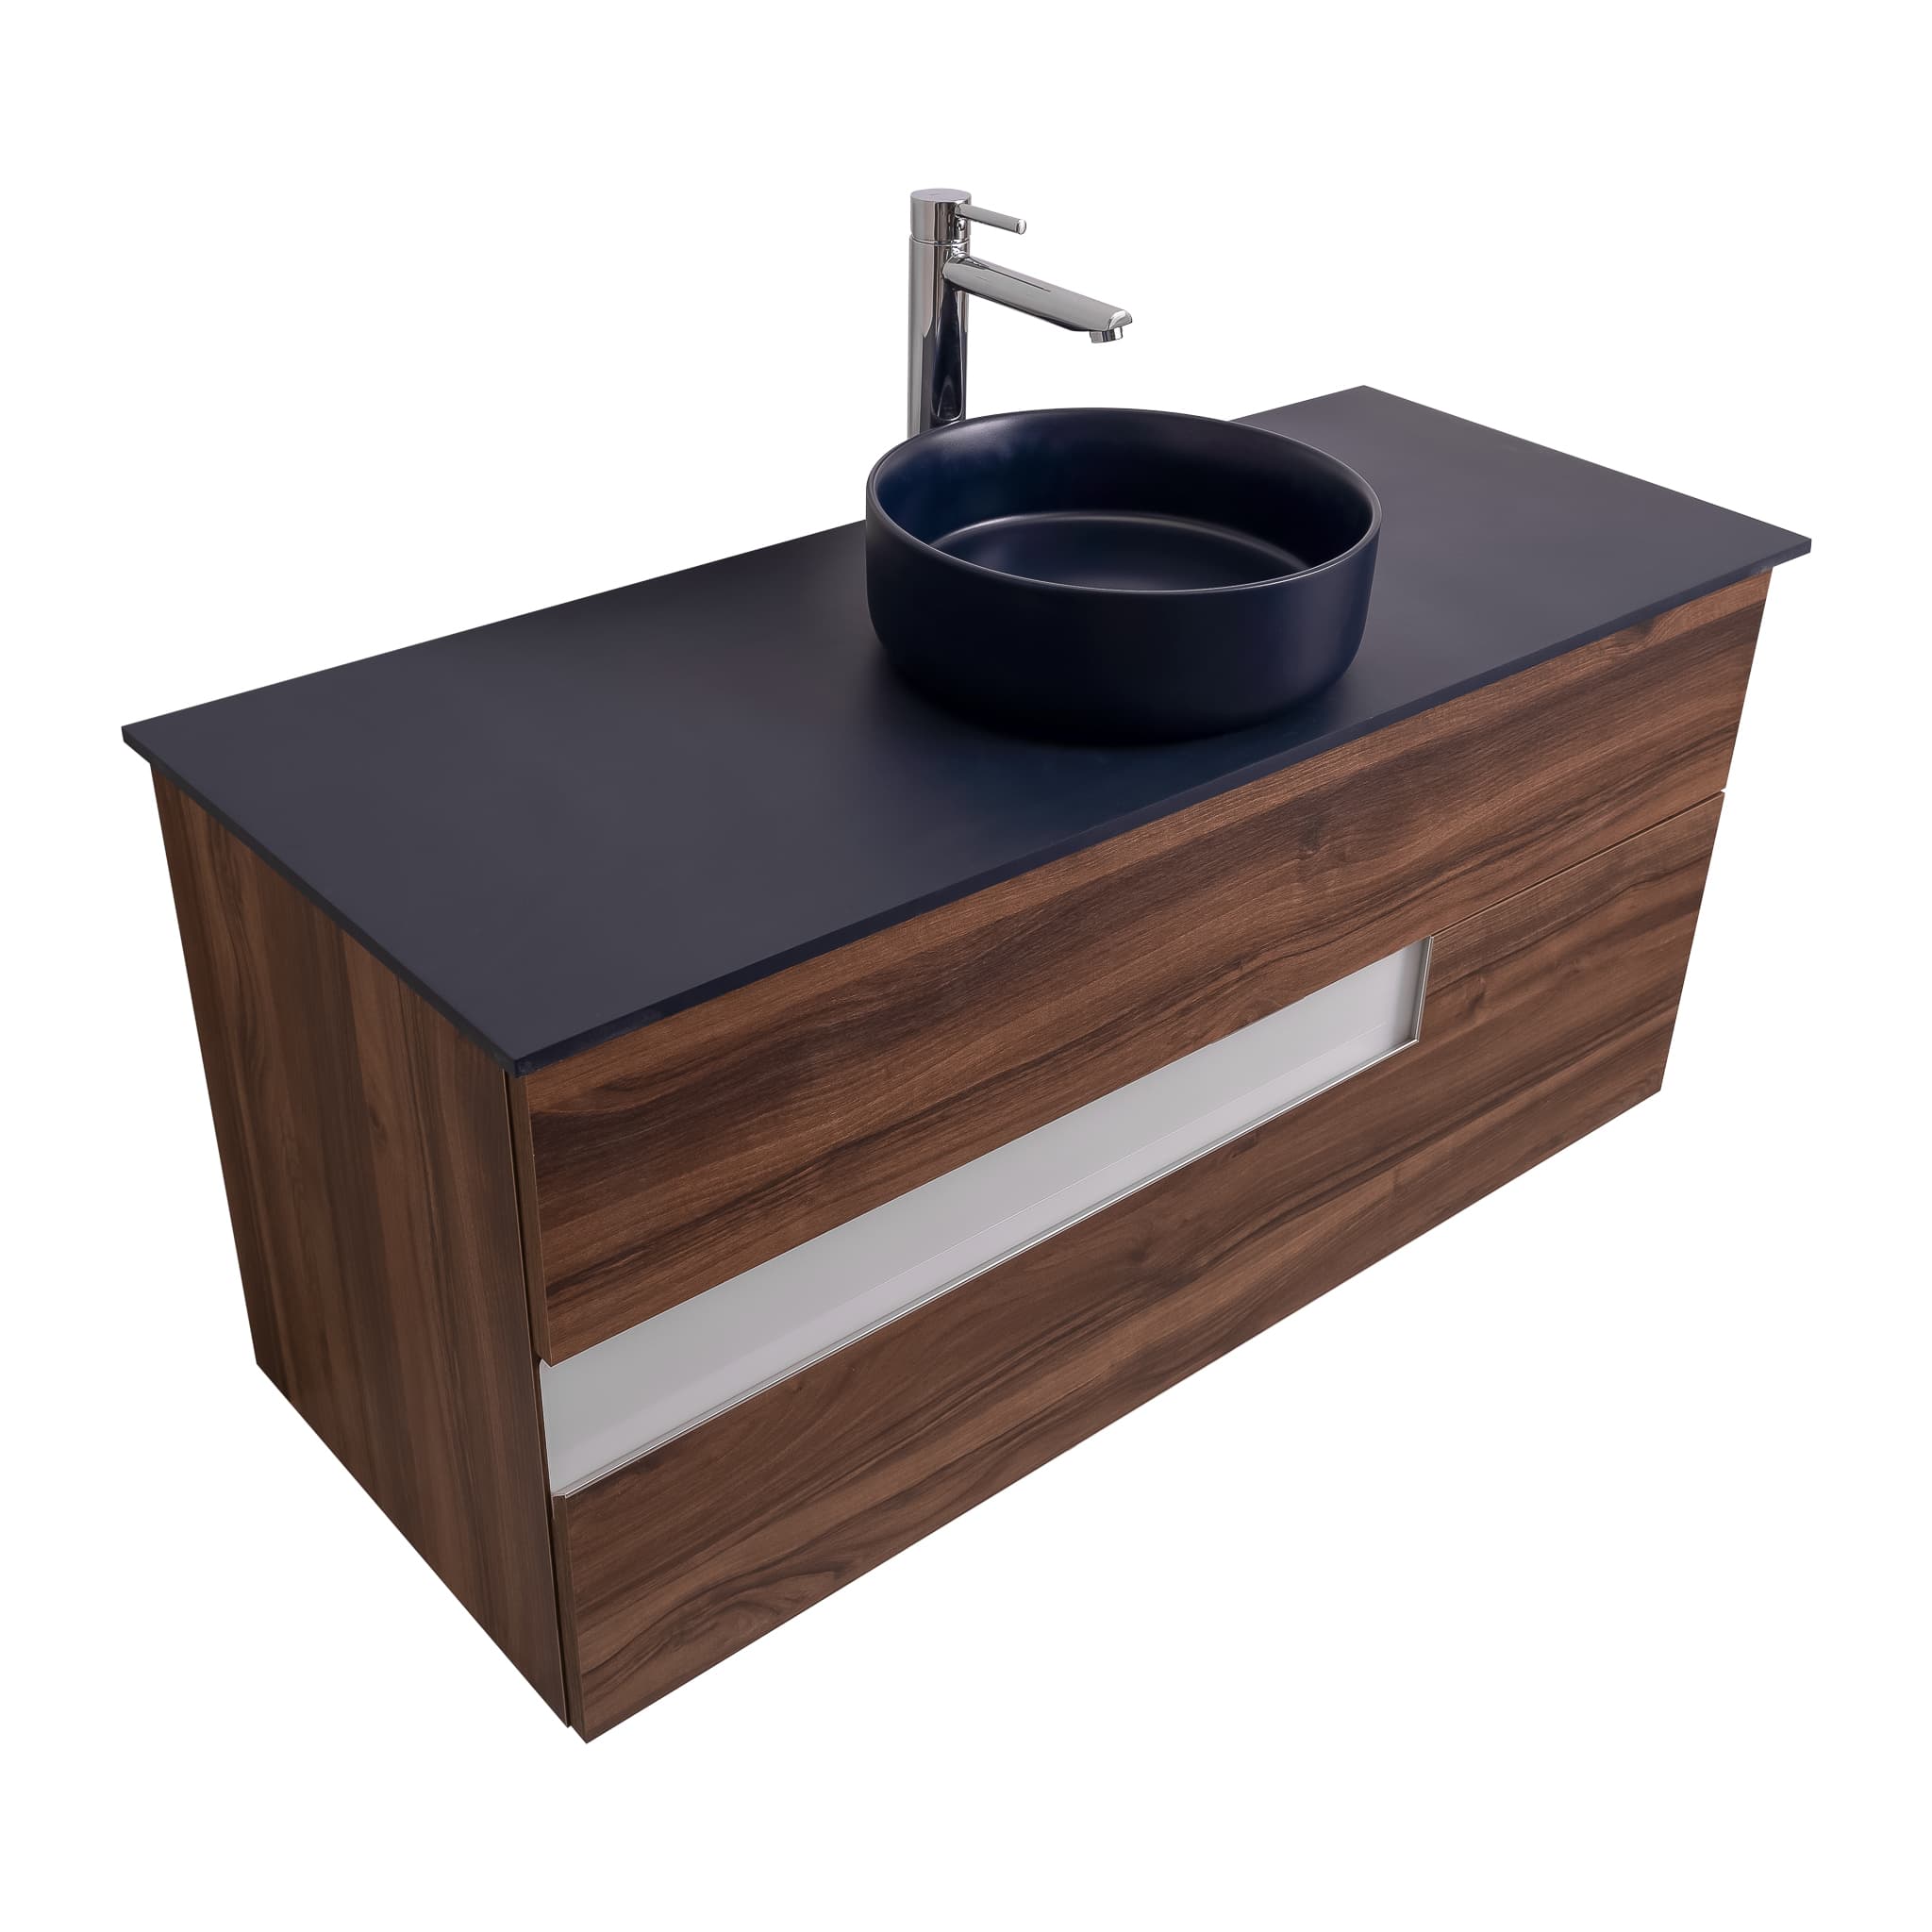 Vision 47.5 Valenti Medium Brown Wood Cabinet, Ares Navy Blue Top And Ares Navy Blue Ceramic Basin, Wall Mounted Modern Vanity Set